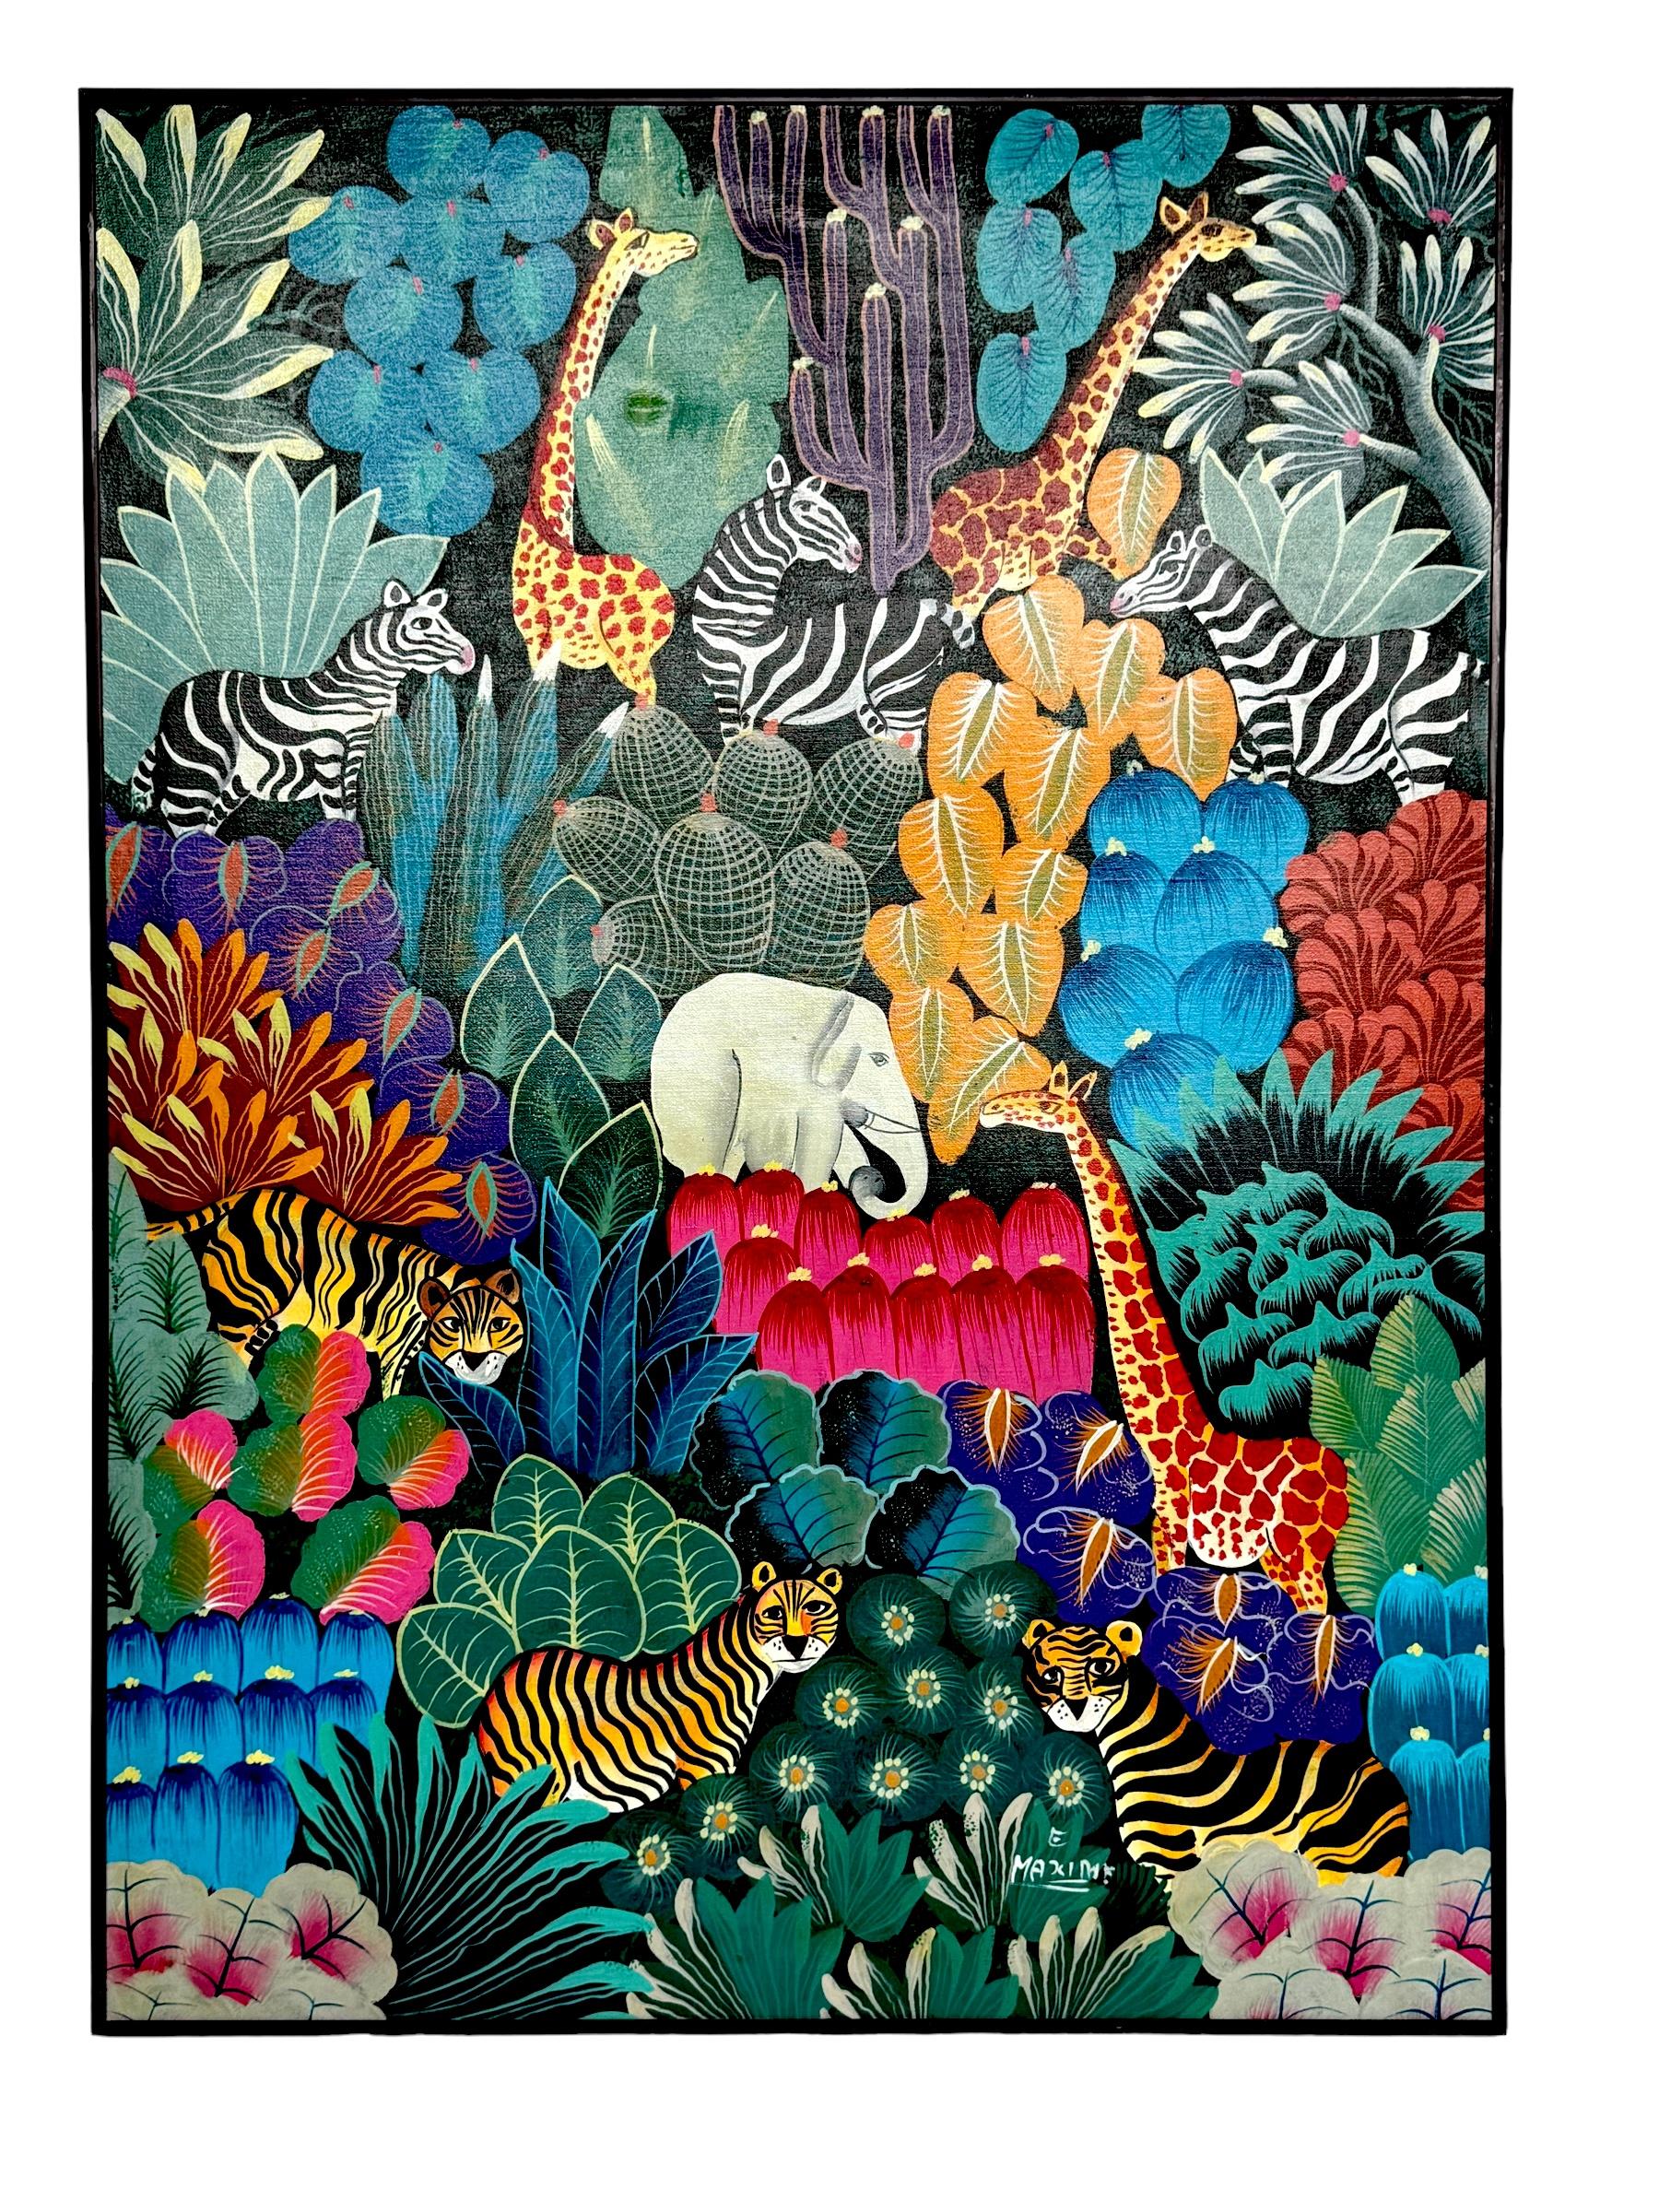 'Peaceable Jungle' by E. Maxime 
Haiti, Late 20th century 

A vibrant masterwork 'Peaceable Jungle' by E. Maxime, hailing from Haiti and painted in the late 20th century. This visually enchanting artwork, standing at 37 inches in height and 27